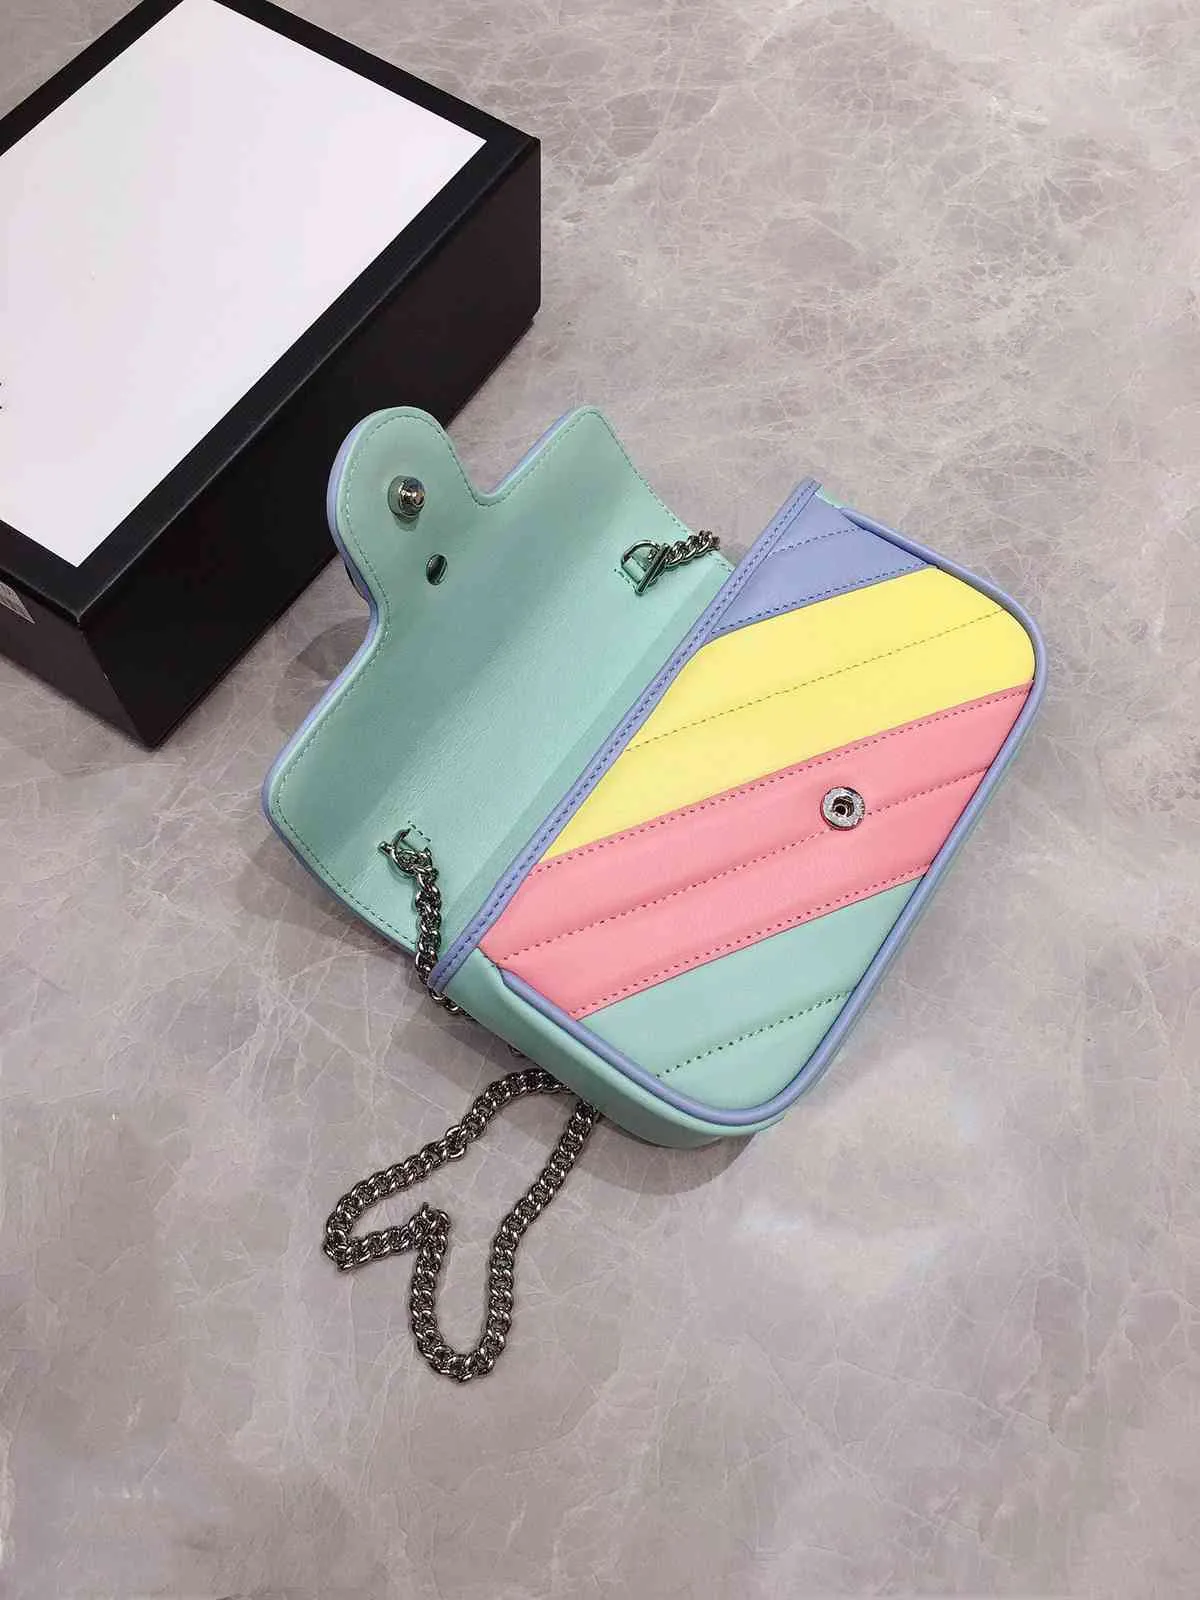 Newest fashion rainbow genuine leather with silver hardware women shoulder bag with box bags hot best top quality mini women crossbody bag 2